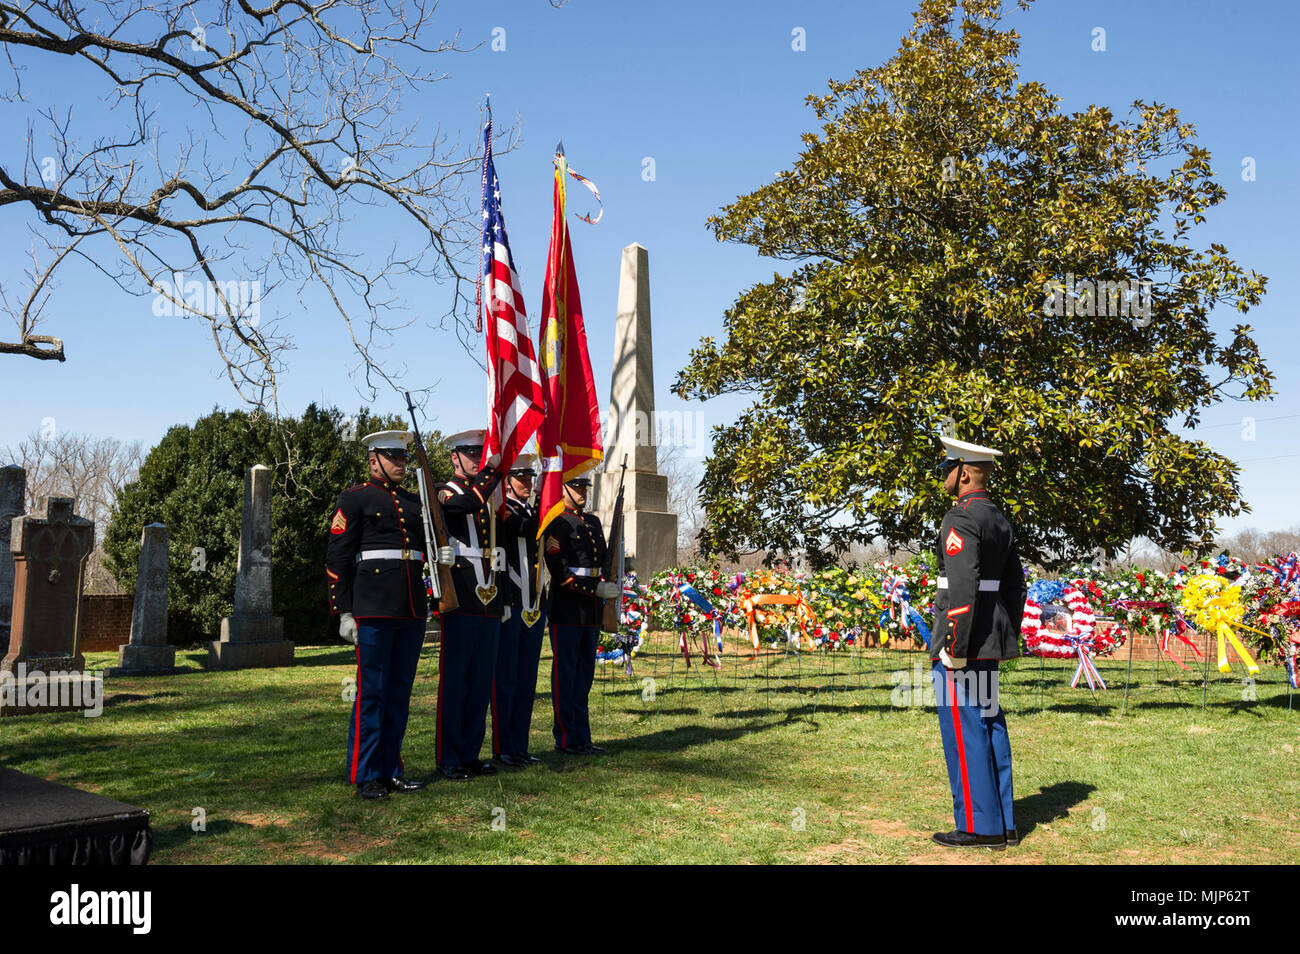 U.S. Marines with Marine Corps Base Quantico Color Guard present the colors for the Presidential wreath laying ceremony held to honor the 4th President of the United States, James Madison, also known as the Father of the Constitution, at his home at Montpelier, Orange, Va., March 16, 2018. This event was held in commemoration of the 267th anniversary of the birth of Madison, born in 1751, and has also been decreed as James Madison Appreciation Day for the Commonwealth of Virginia. Armed Forces and civilians displaying courage bravery dedication commitment and sacrifice Stock Photo